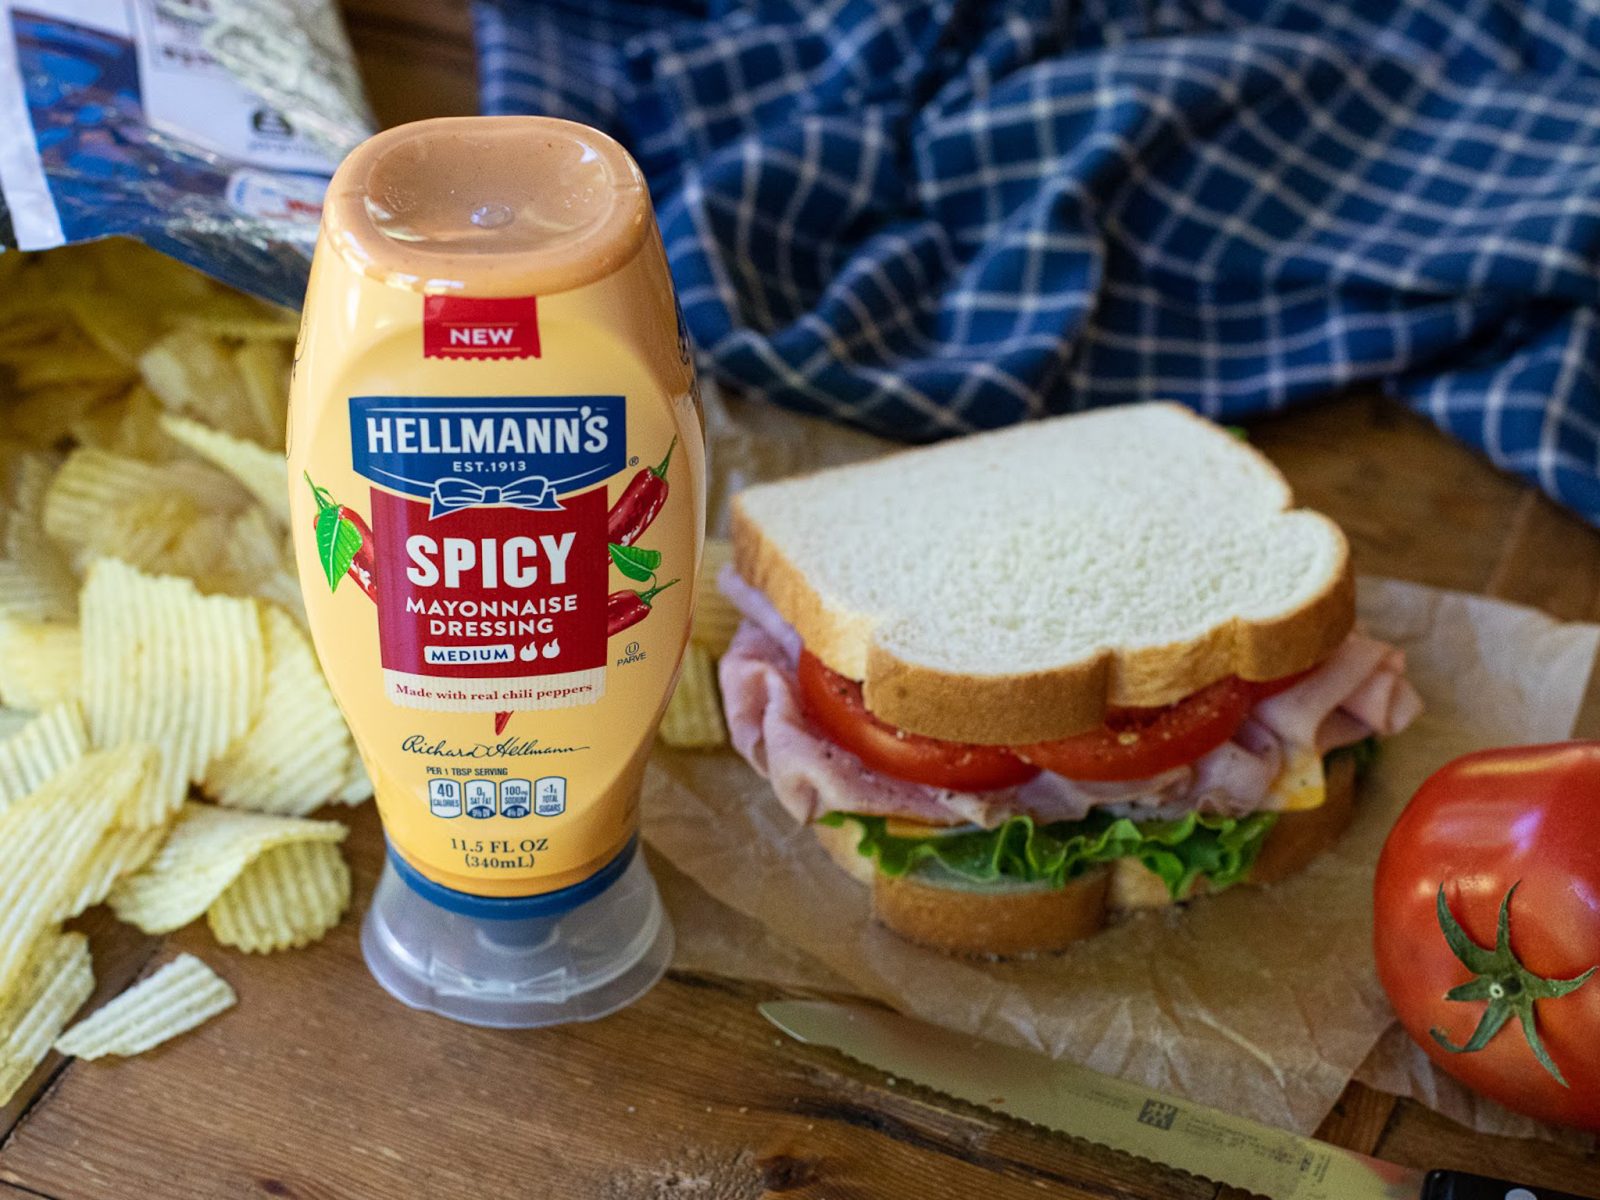 Hellmann’s Spicy Mayonnaise Dressing Just $1.74 At Kroger – Ends 11/12